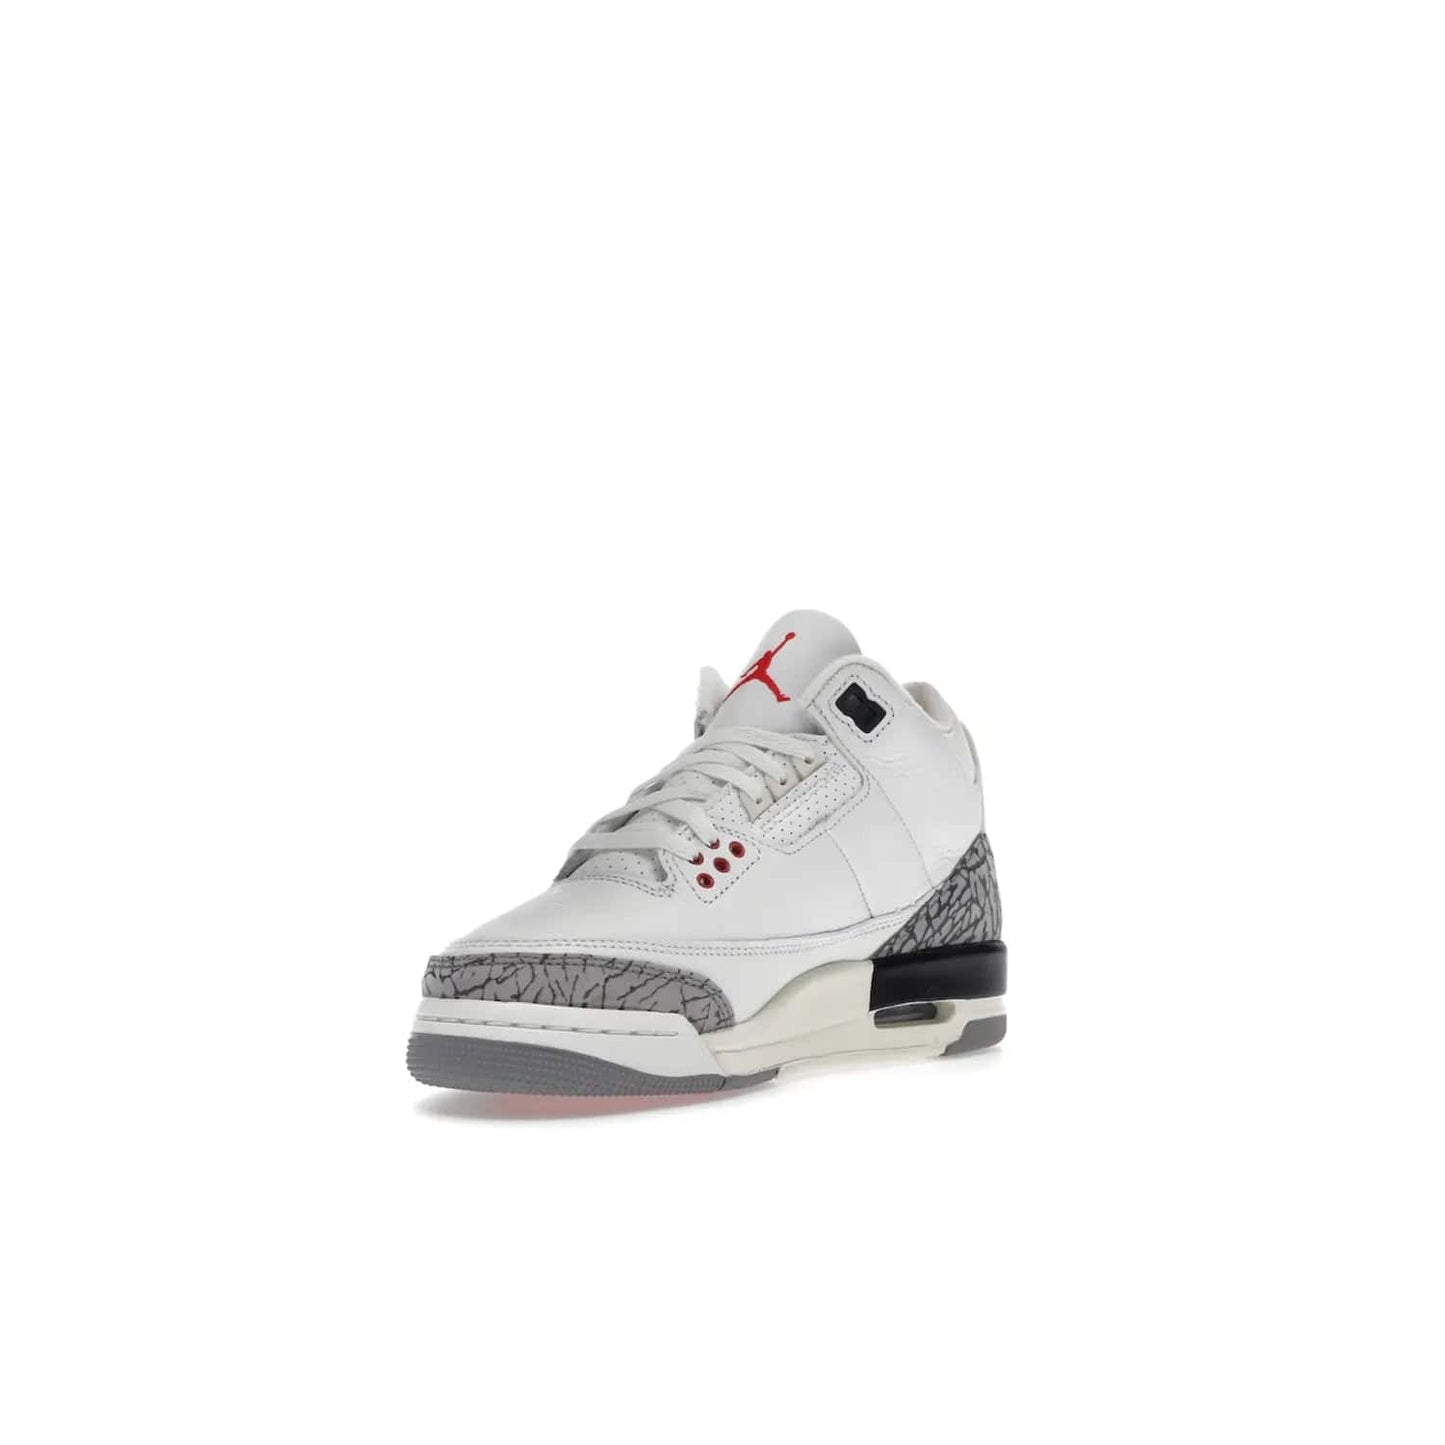 Jordan 3 Retro White Cement Reimagined (GS) - Image 14 - Only at www.BallersClubKickz.com - Grab the perfect blend of modern design and classic style with the Jordan 3 Retro White Cement Reimagined (GS). Features Summit White, Fire Red, Black, and Cement Grey colorway, iconic Jordan logo embroidered on the tongue, and “Nike Air” branding. Limited availability, get your pair before March 11th 2023.